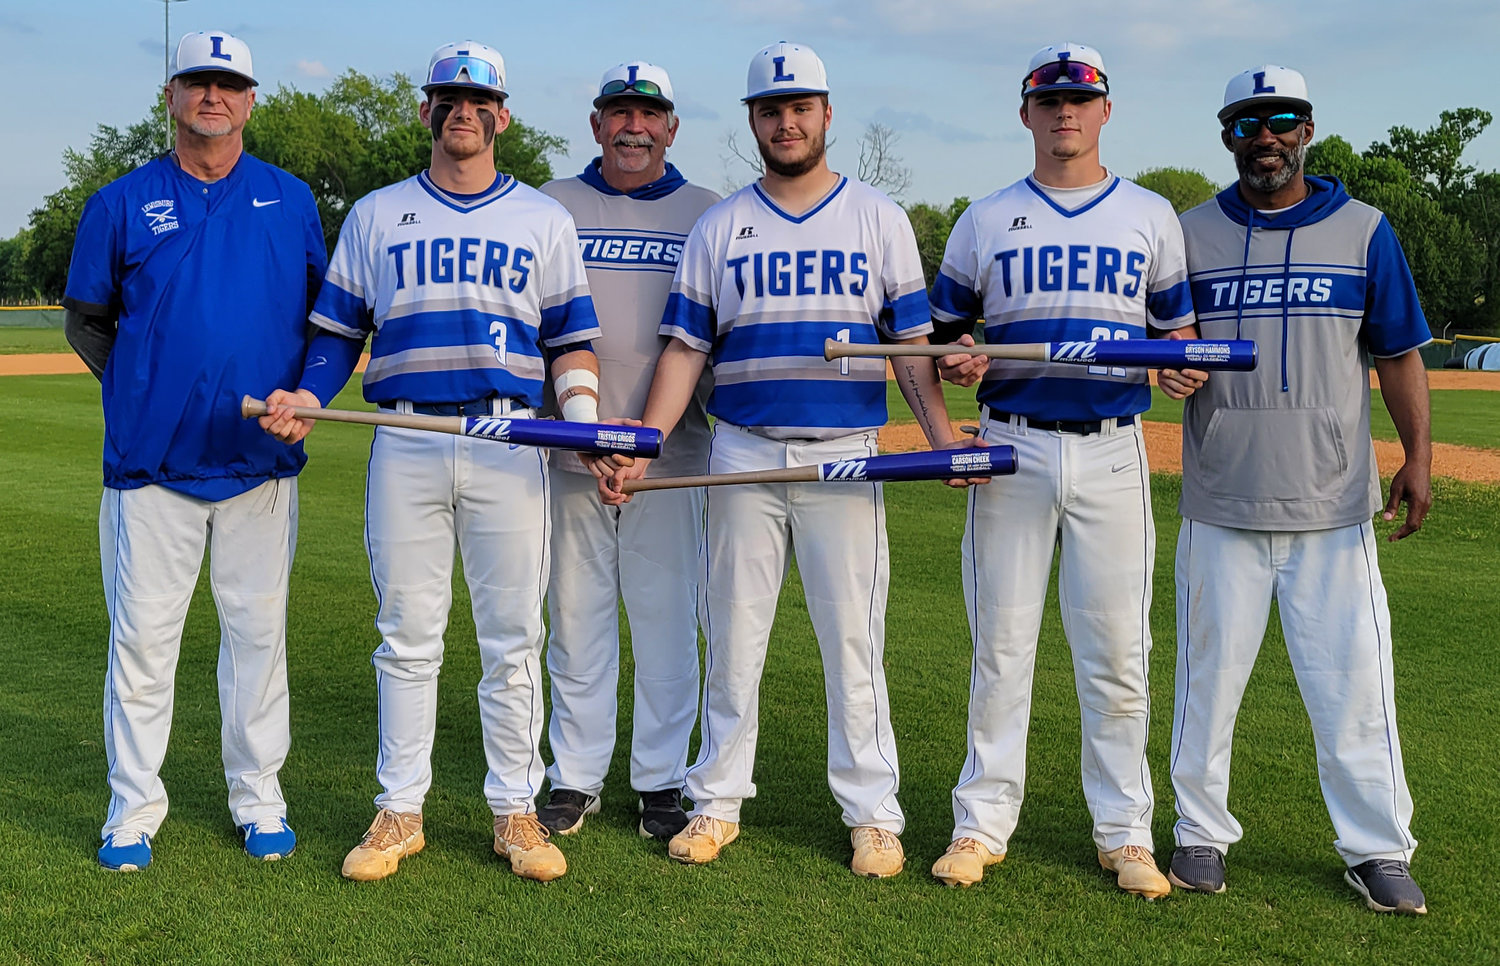 Prior to Friday night’s first pitch, Marshall County honored seniors (from left) Tristan Griggs, Carson Cheek and Bryson Hammons.